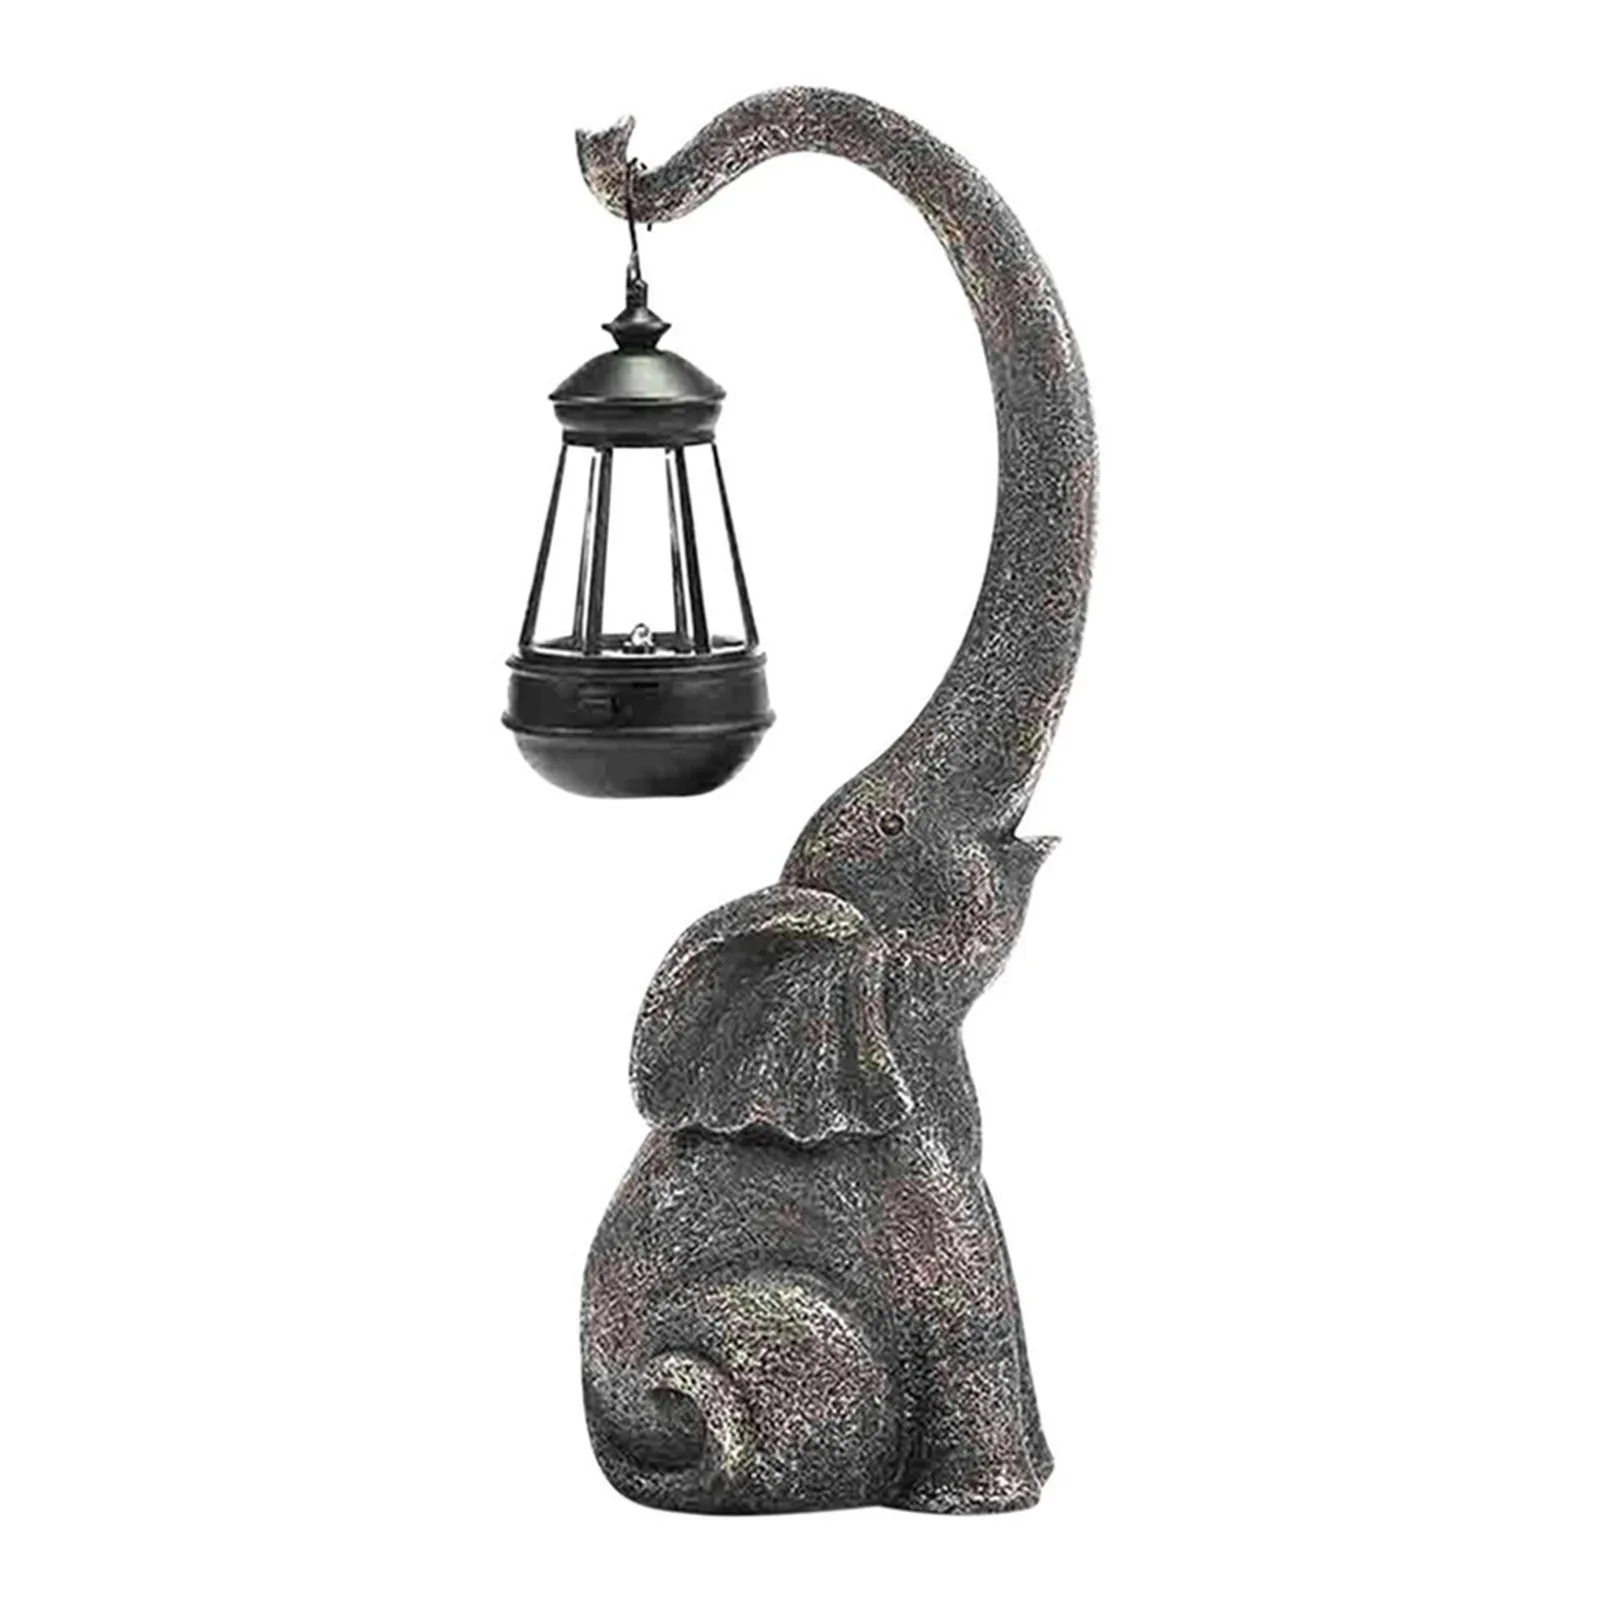 

Vintage Style Solar Lights Elephant Garden Decor with Soft Warm Light Eco friendly and Durable Outdoor Ornament